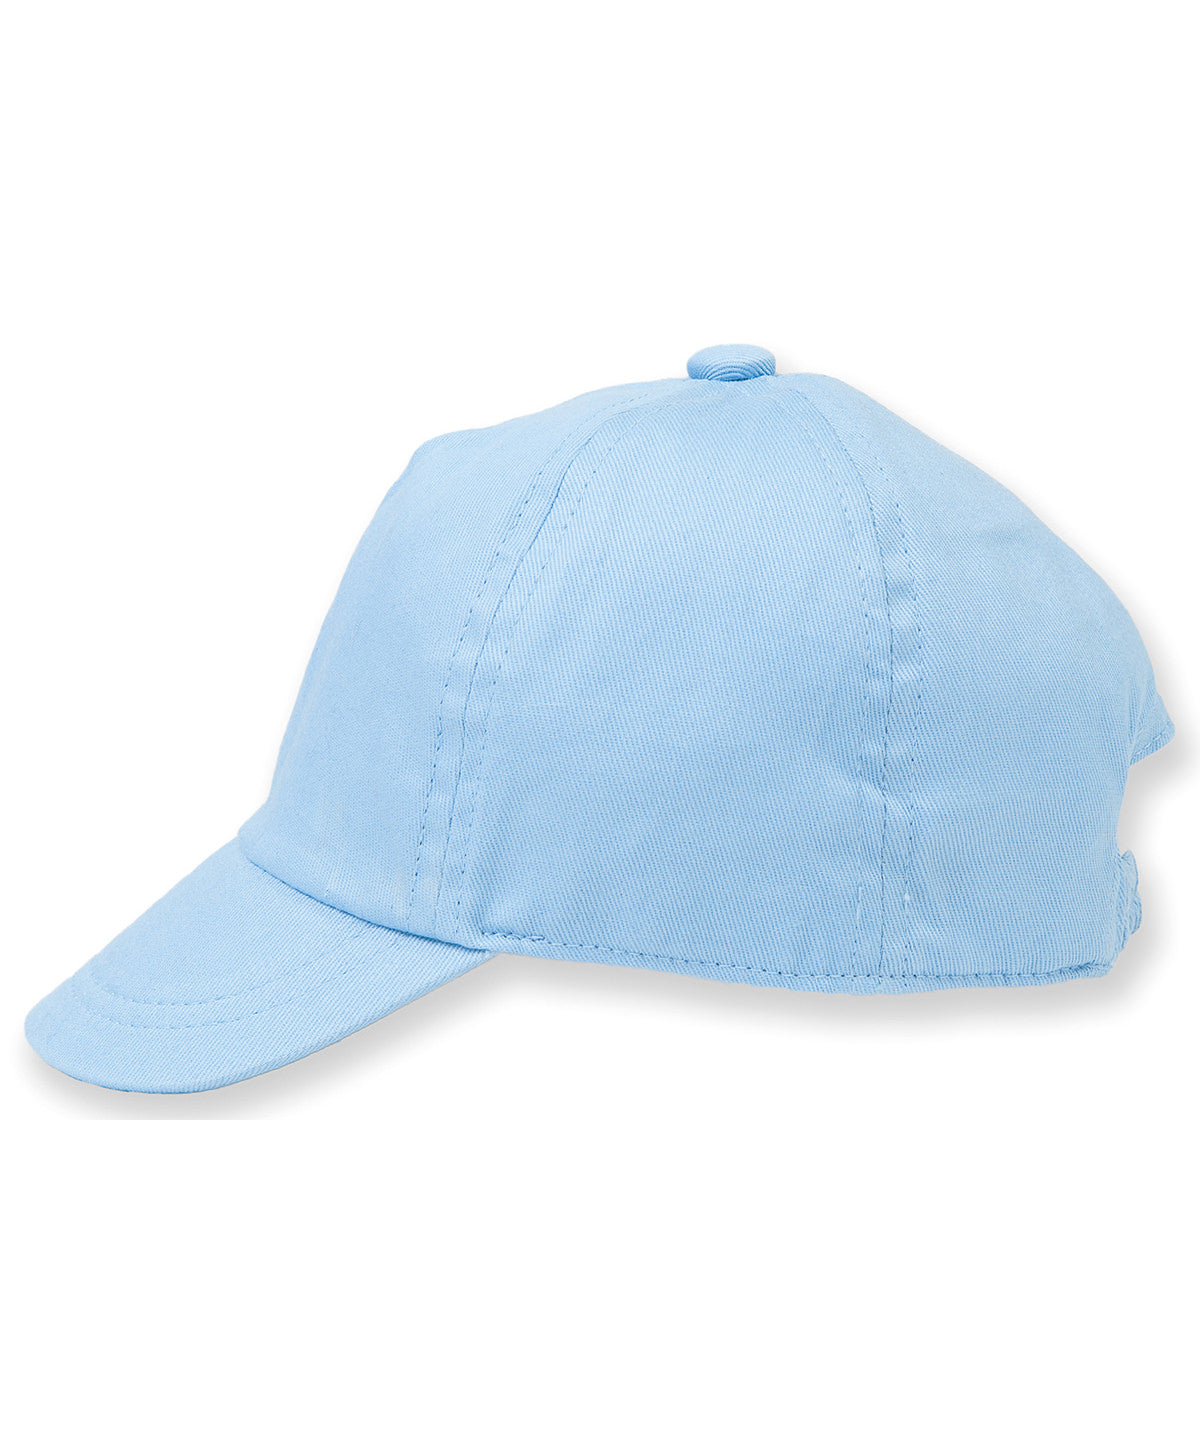 Baby/toddler cap | Pale Blue